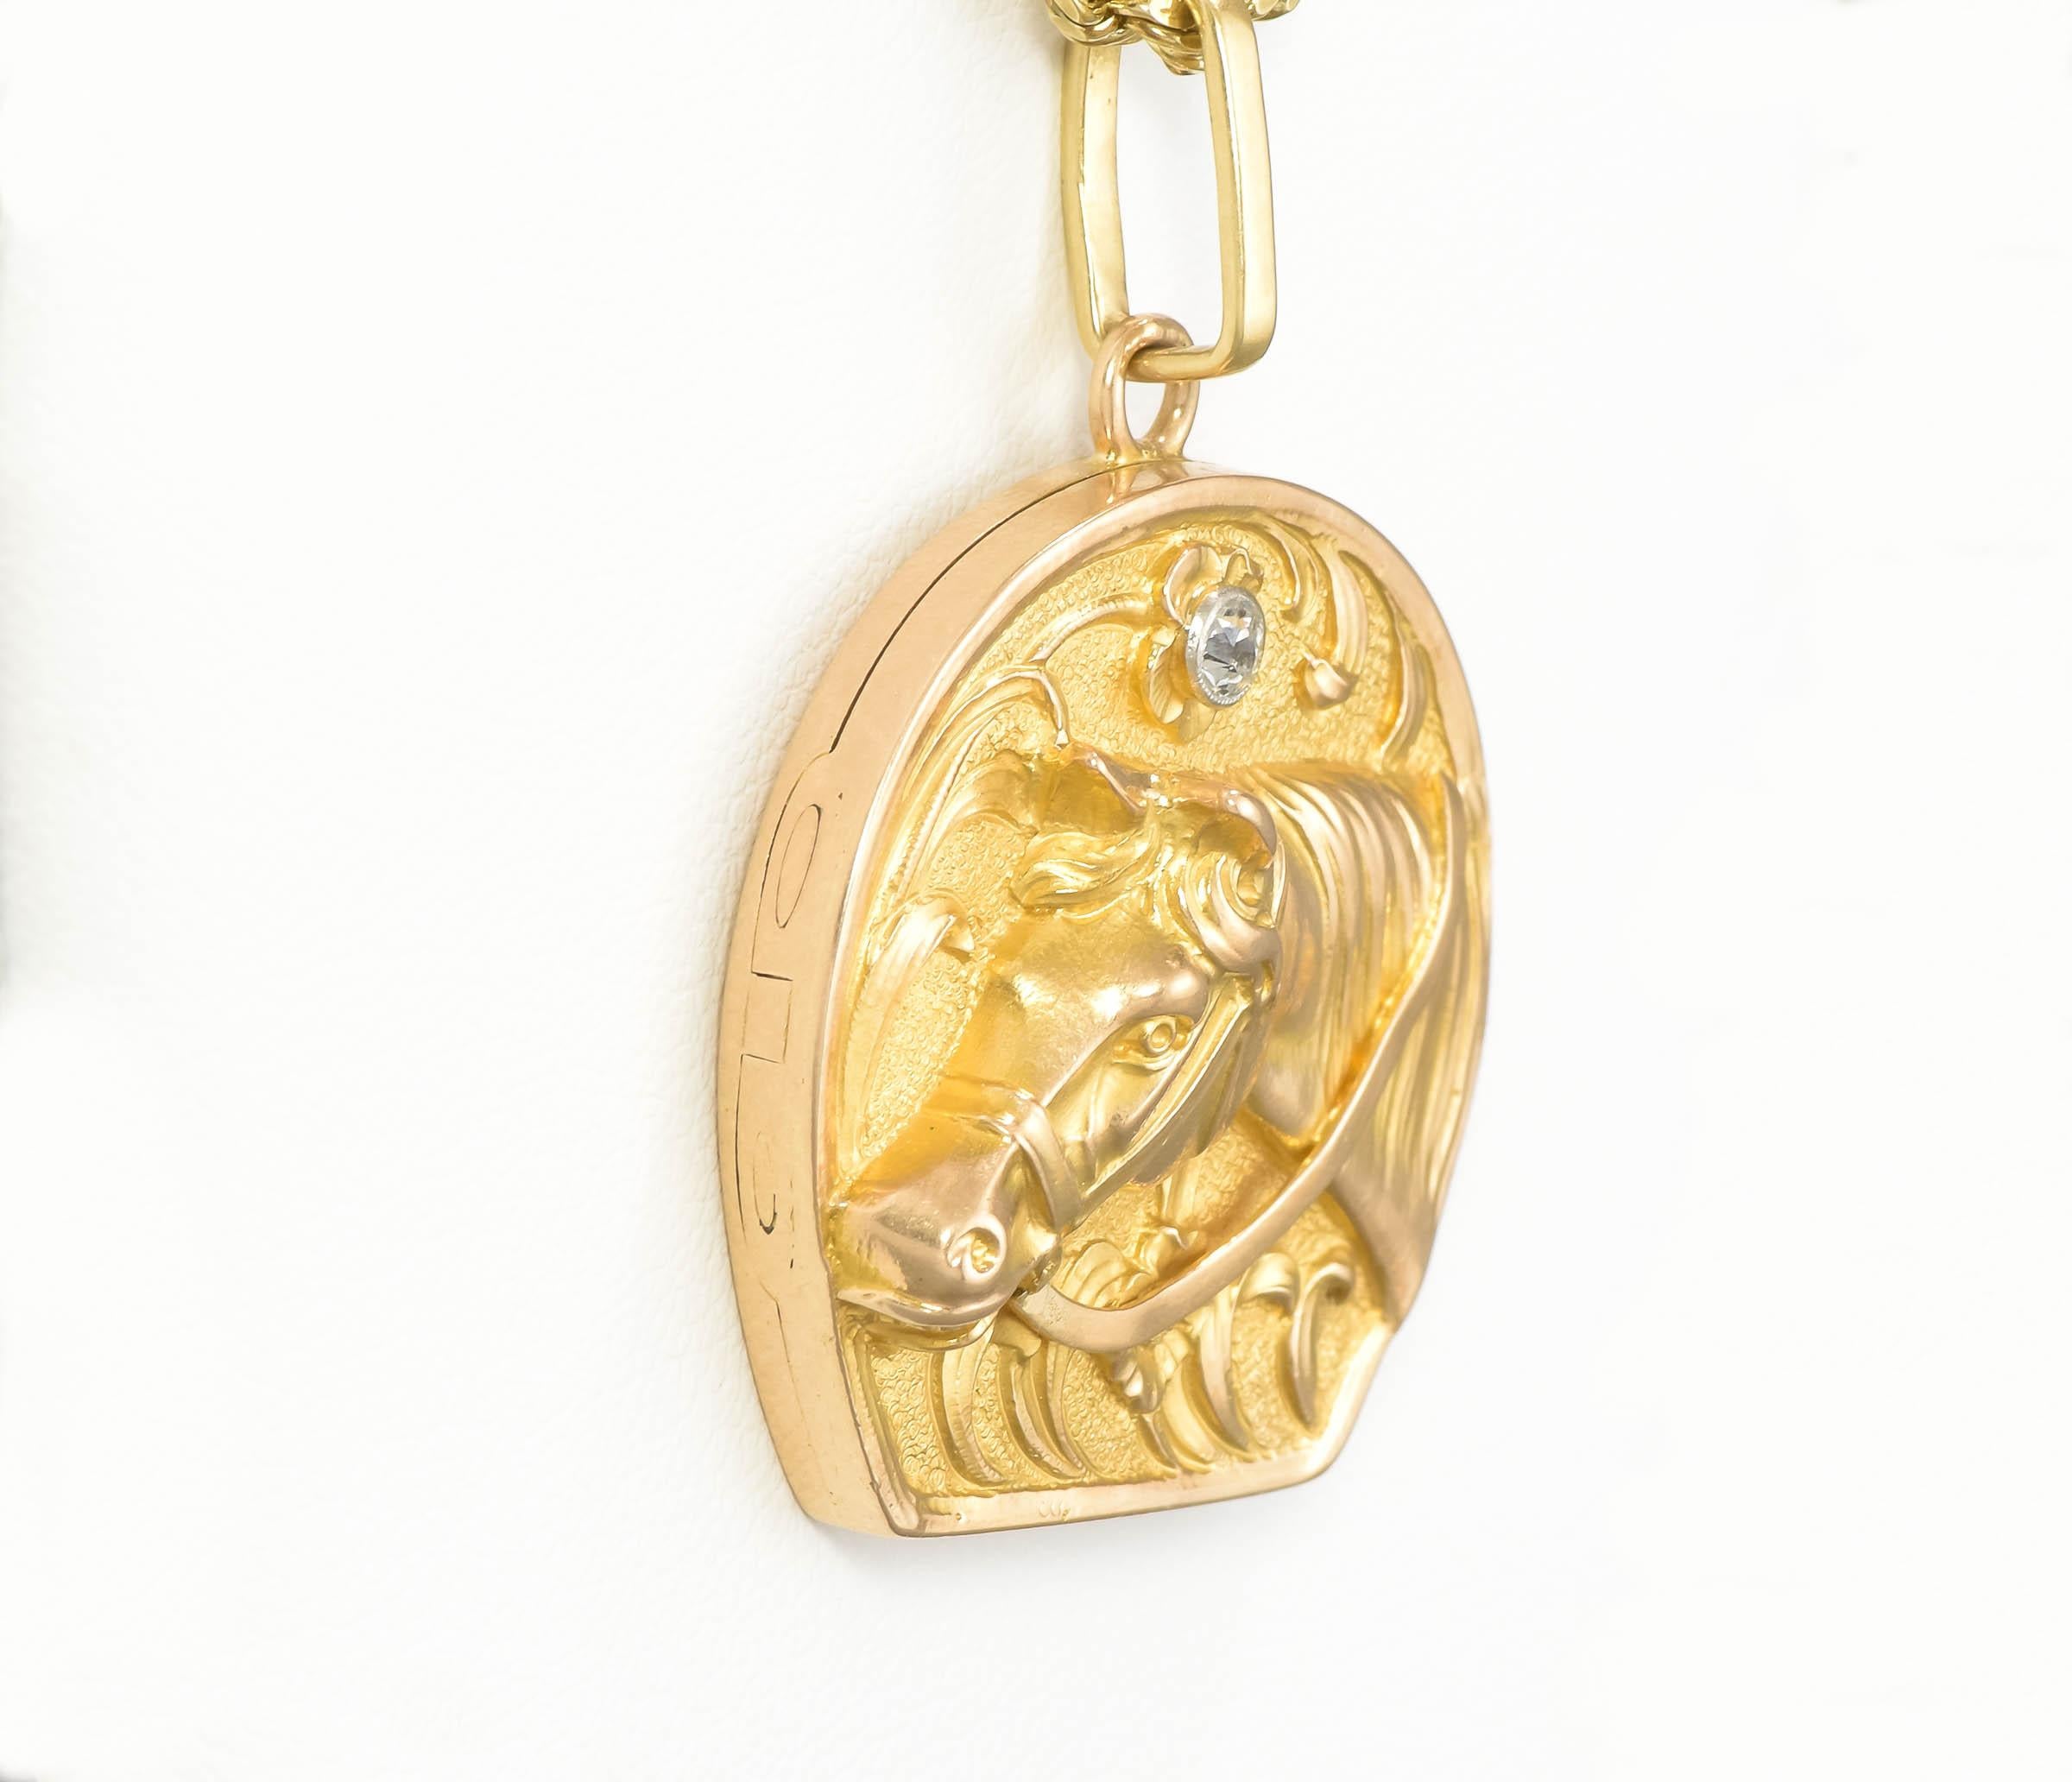 Dating to the Art Nouveau period, this superb gold horseshoe shaped locket features a very dimensional/high relief depiction of a horse surrounded by a foliate design, surmounted by a fiery old European cut diamond.  Perfect for an Equestrian or